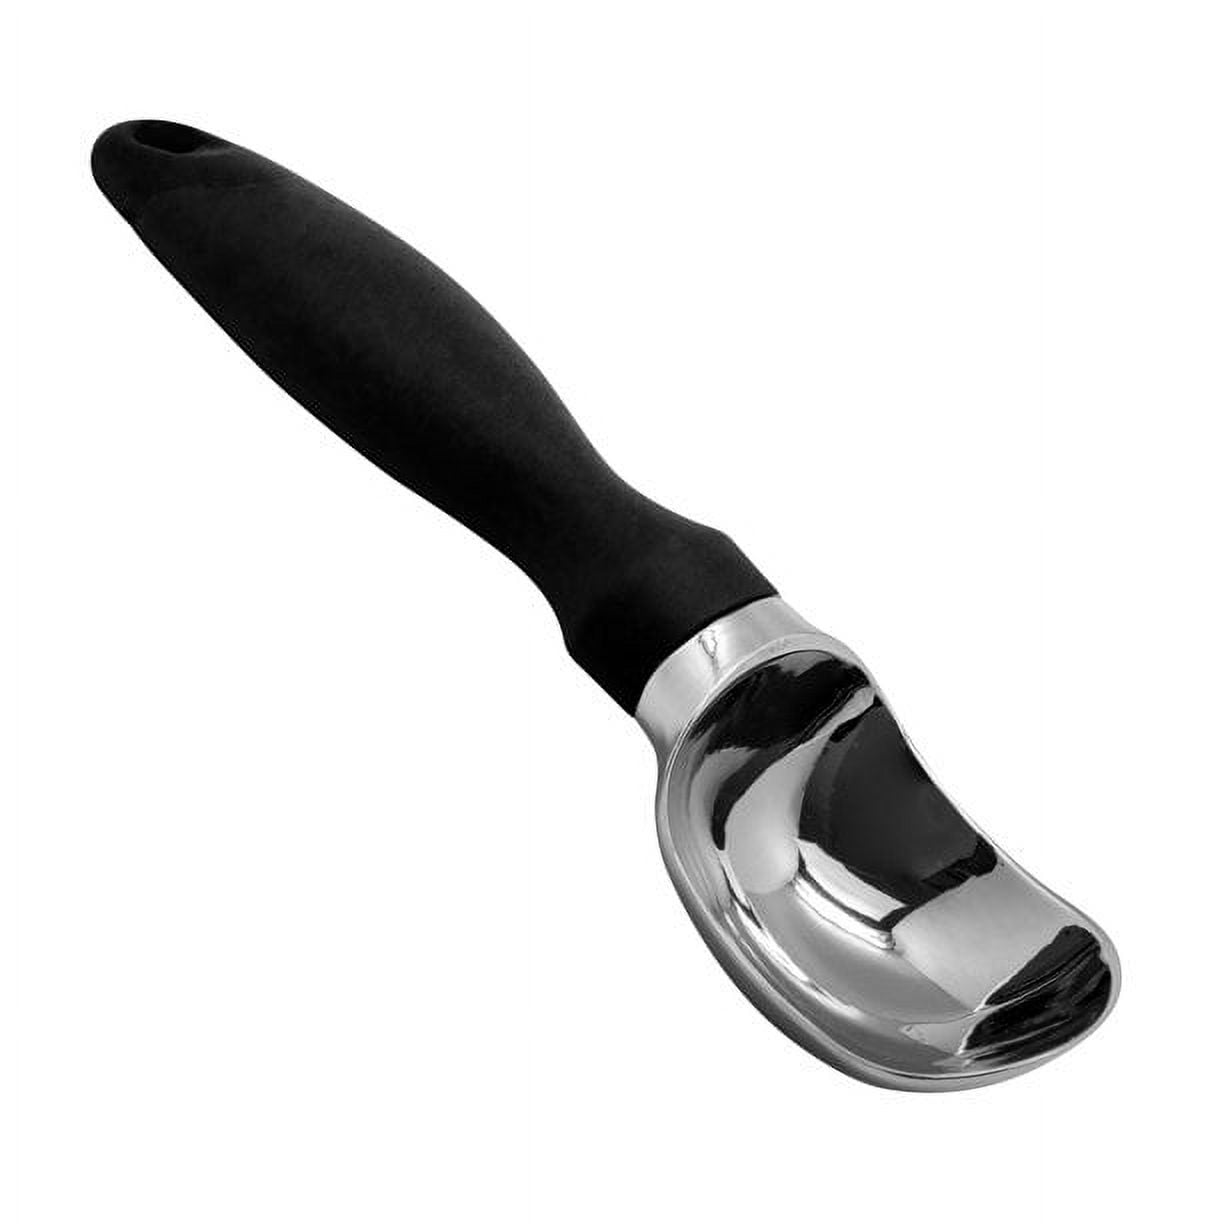 Large Stainless Steel Ice Cream Scoop - Creative Kitchen Gadget For Easy  Scooping And Serving - Temu